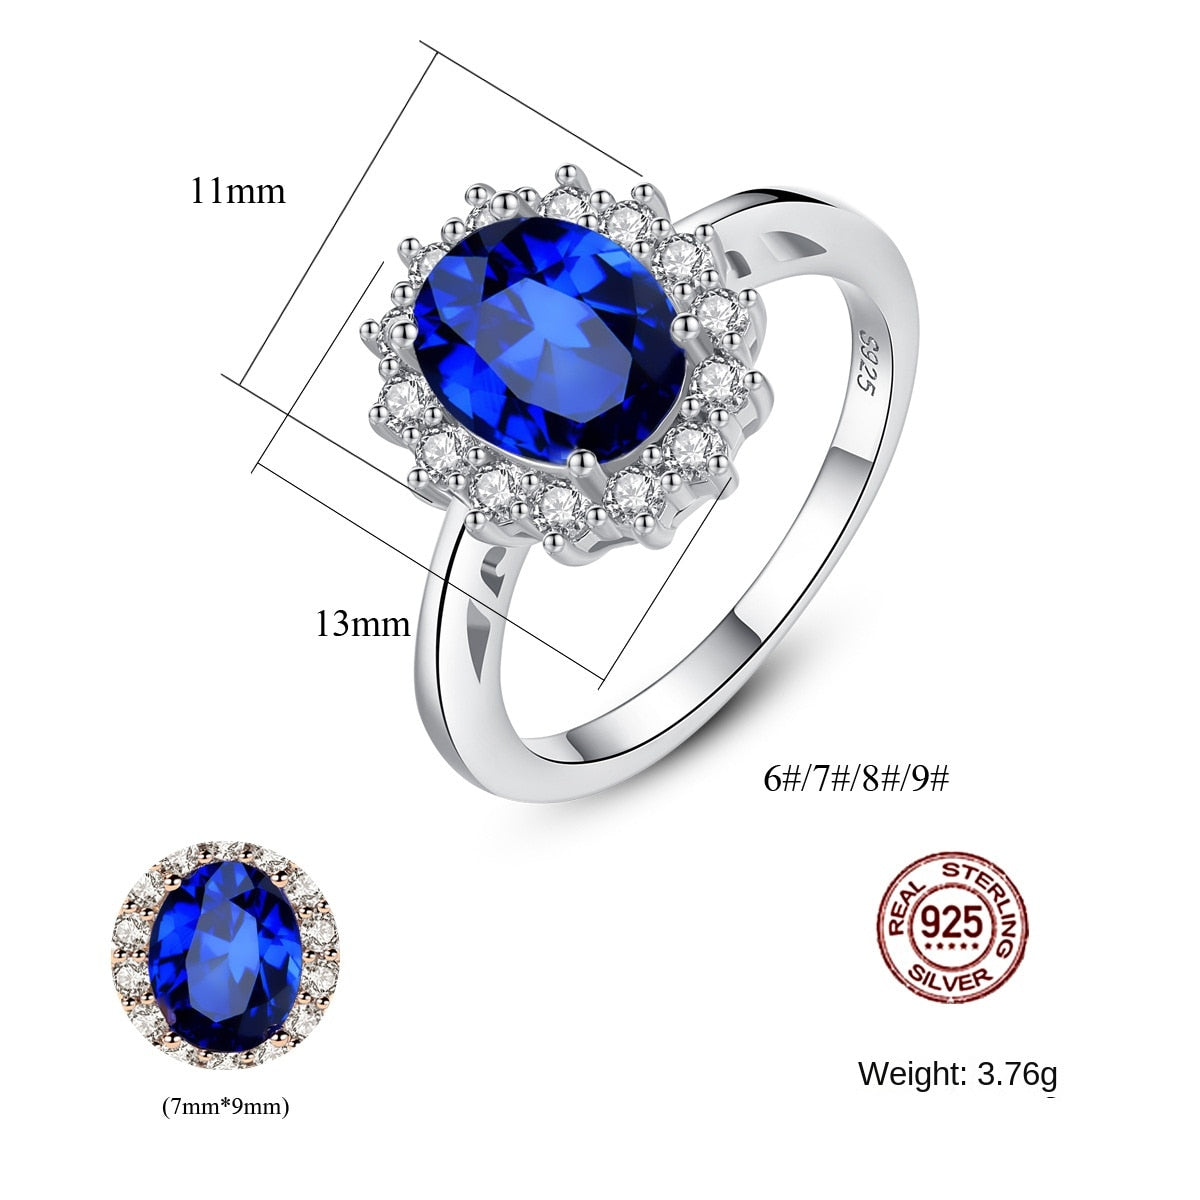 Gemstonely-925 Sterling Silver Simulated Kashmir Blue Sapphire Jewelry - Chic and Sophisticated Ring with Personalized and Refined Charm